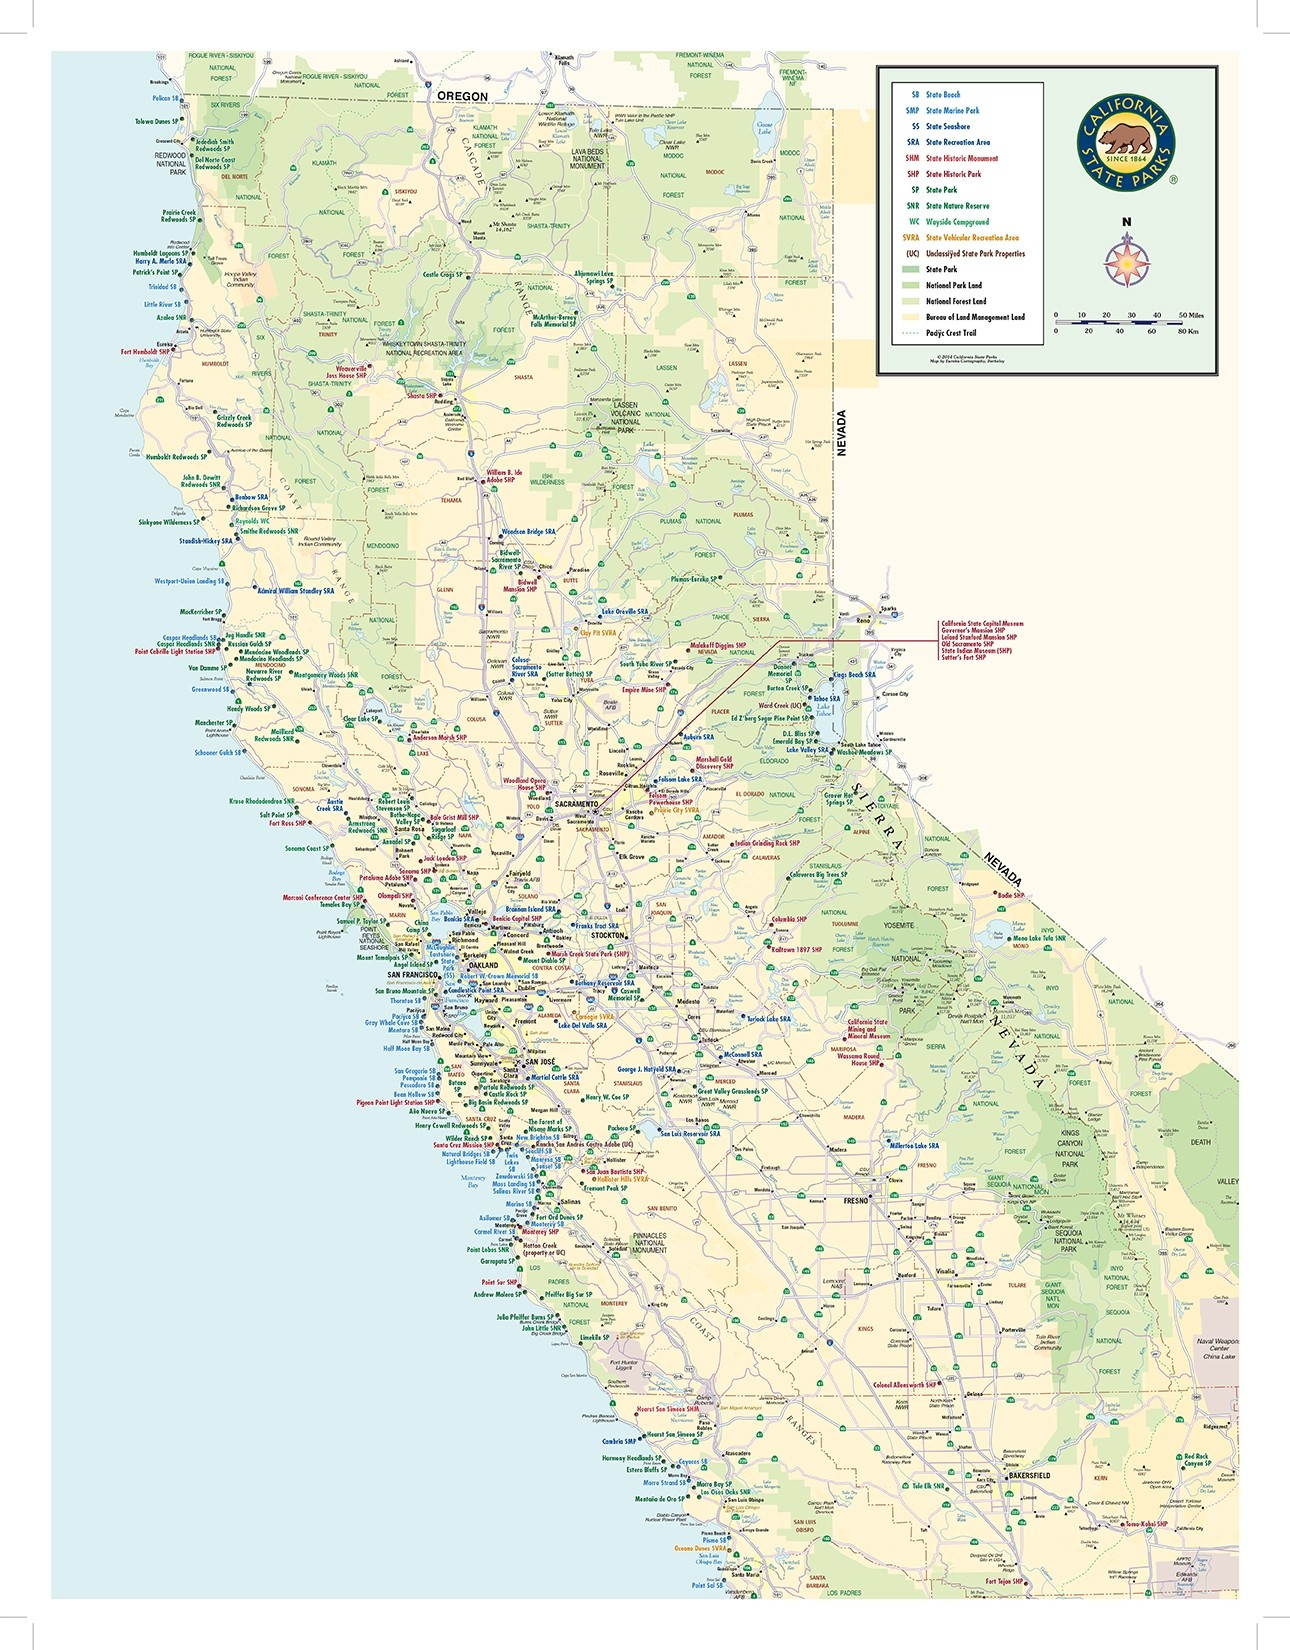 California State Parks Statewide Map - California State And National Parks Map